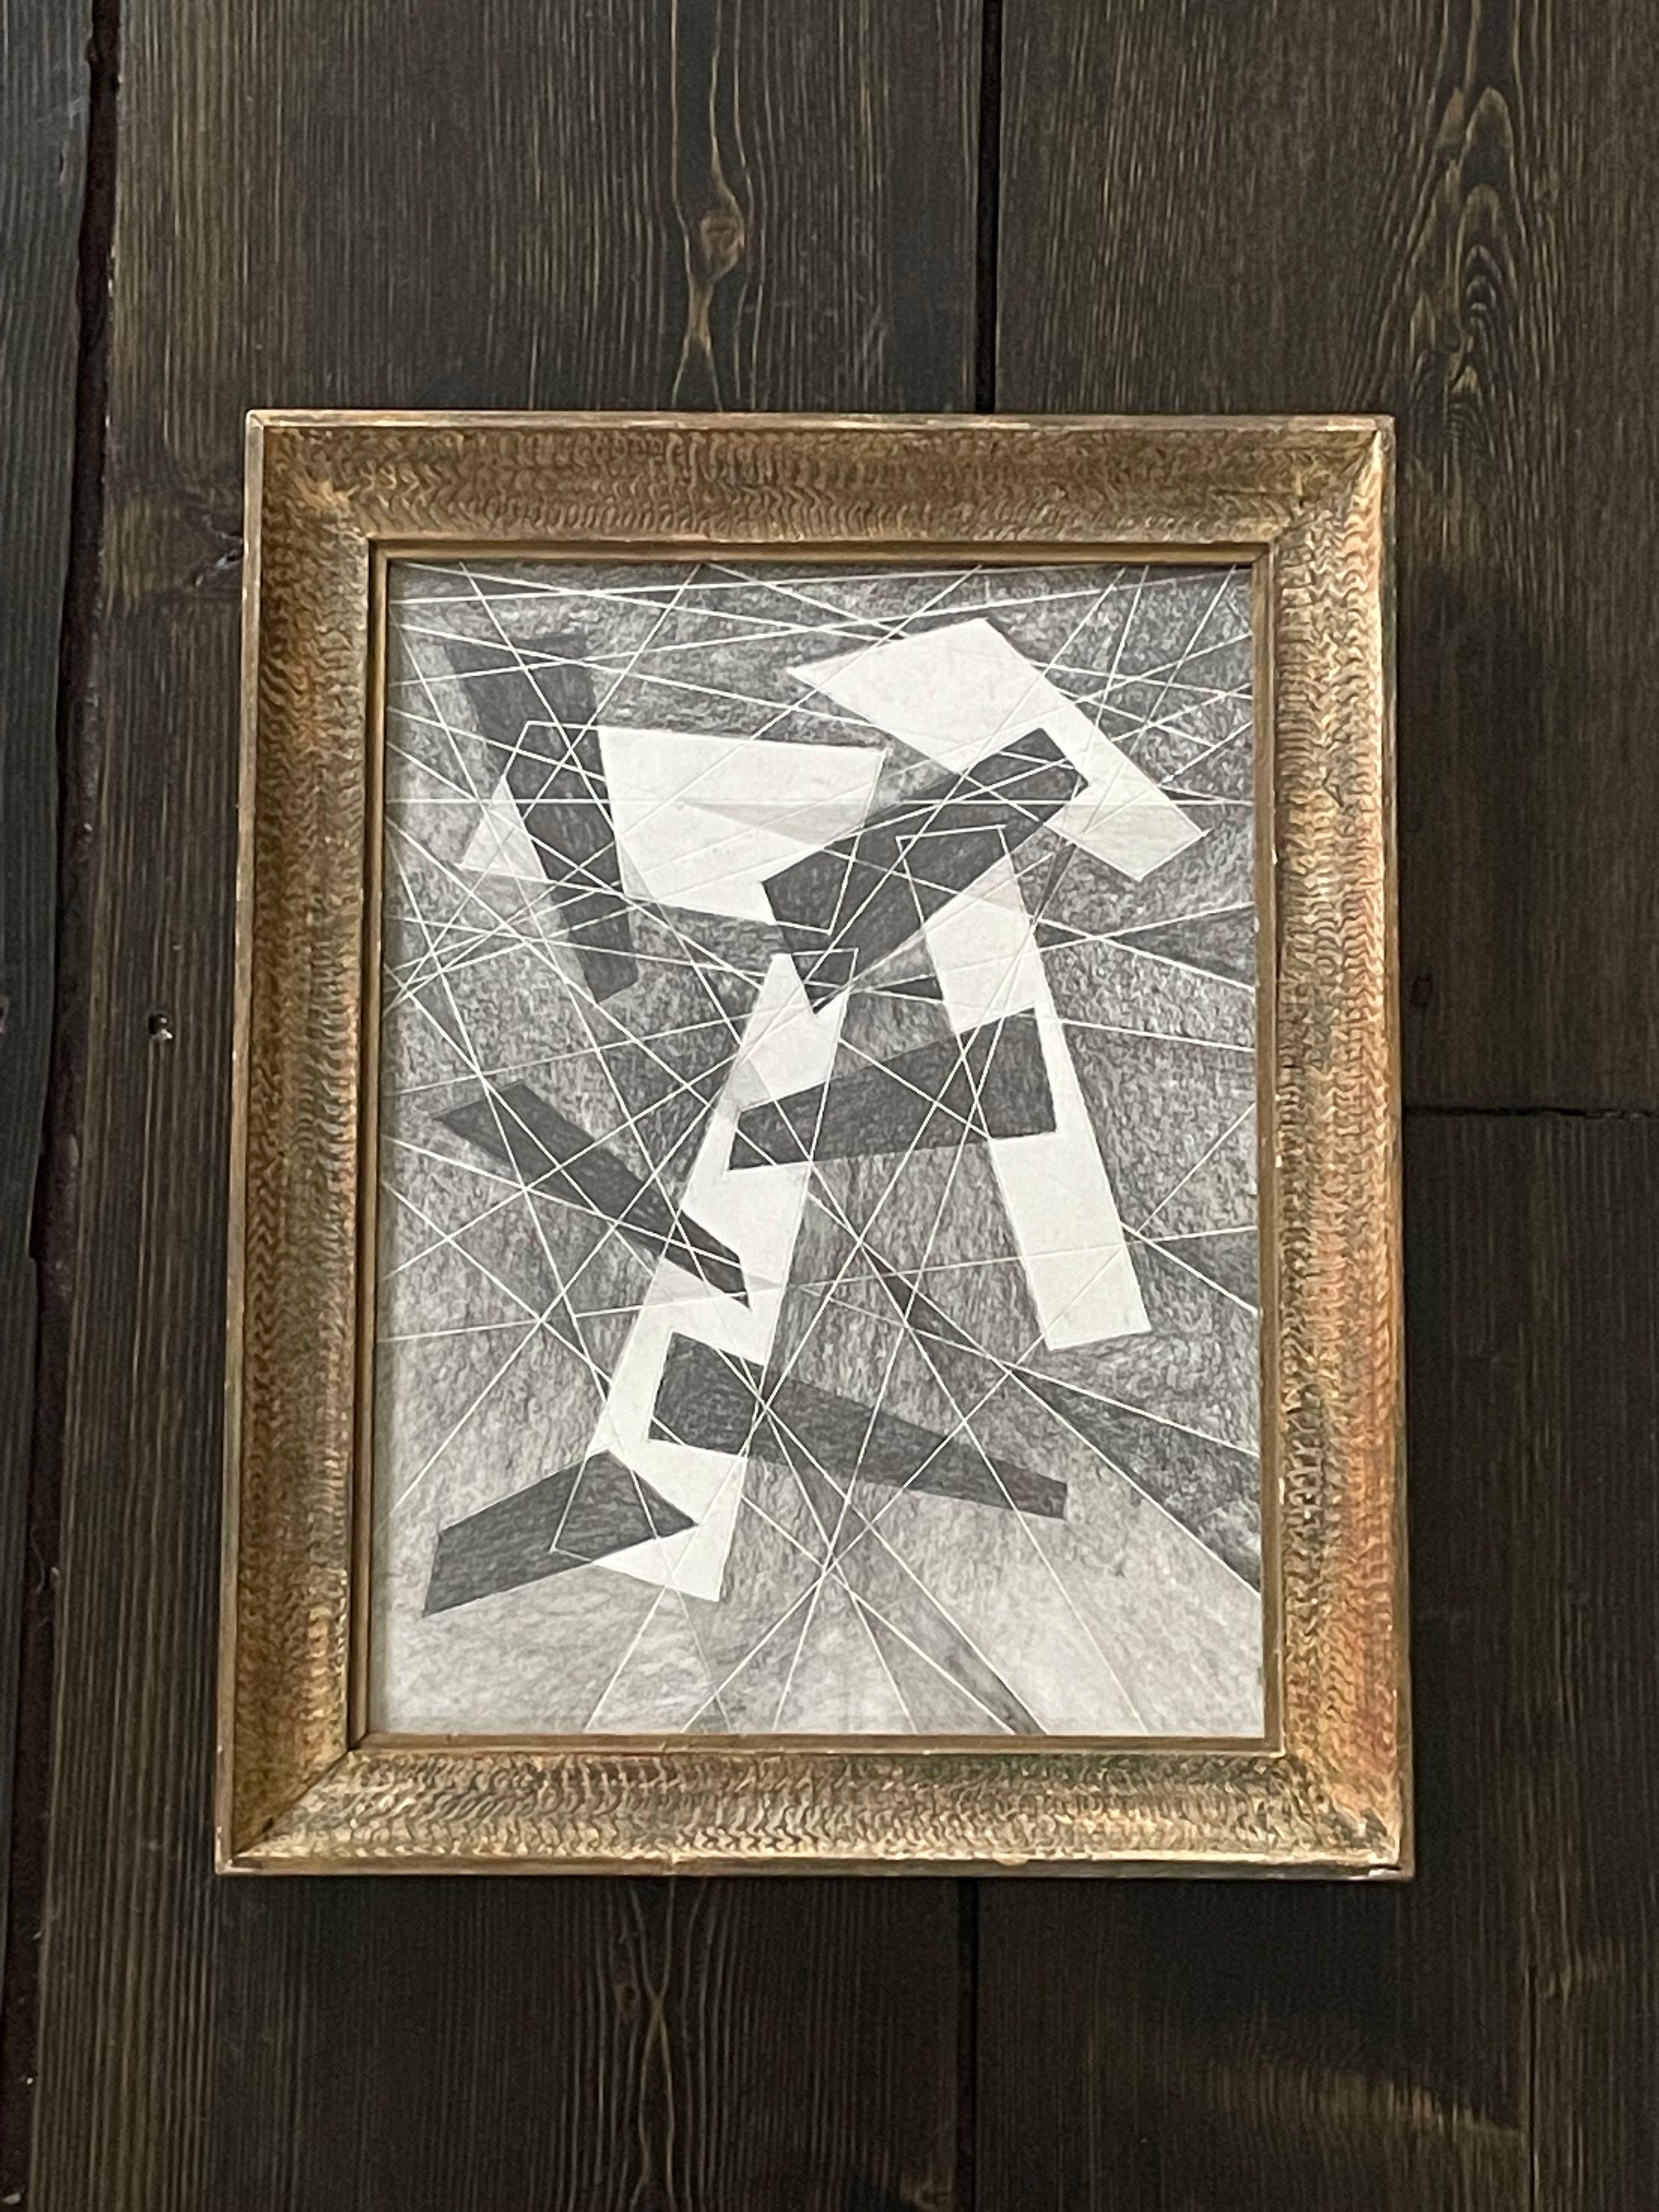 Graphite Drawing in Vintage Frame by David Dew Bruner, USA, Contemporary 1